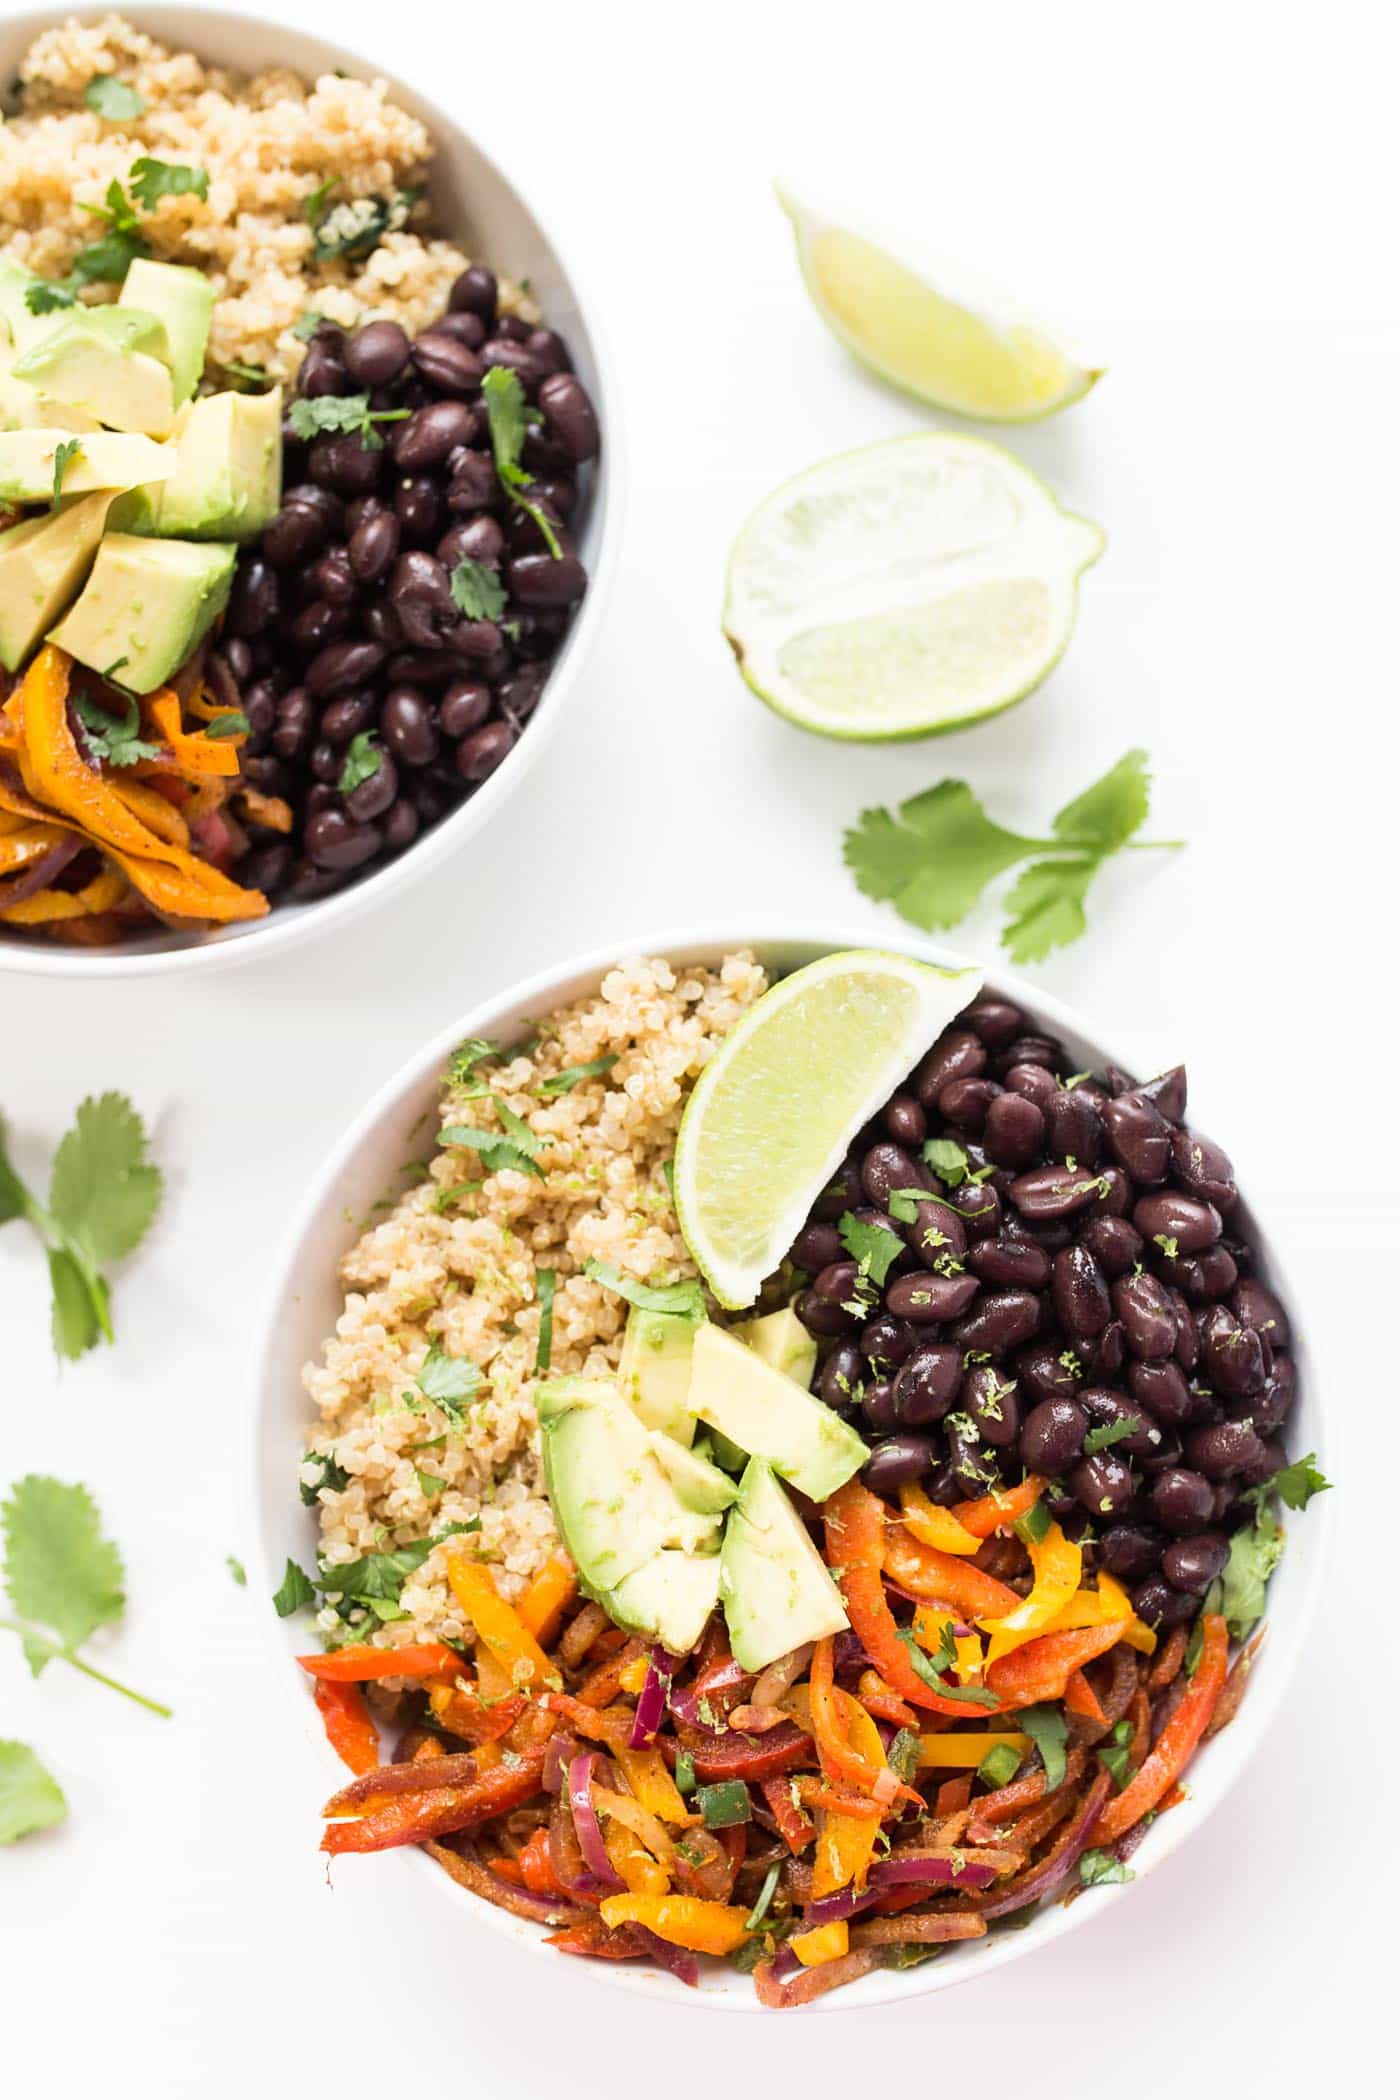 Black Bean Quinoa Fajita Bowls -- ready in just 20 minutes, this meatless meal is packed with protein, veggies and healthy carbs!